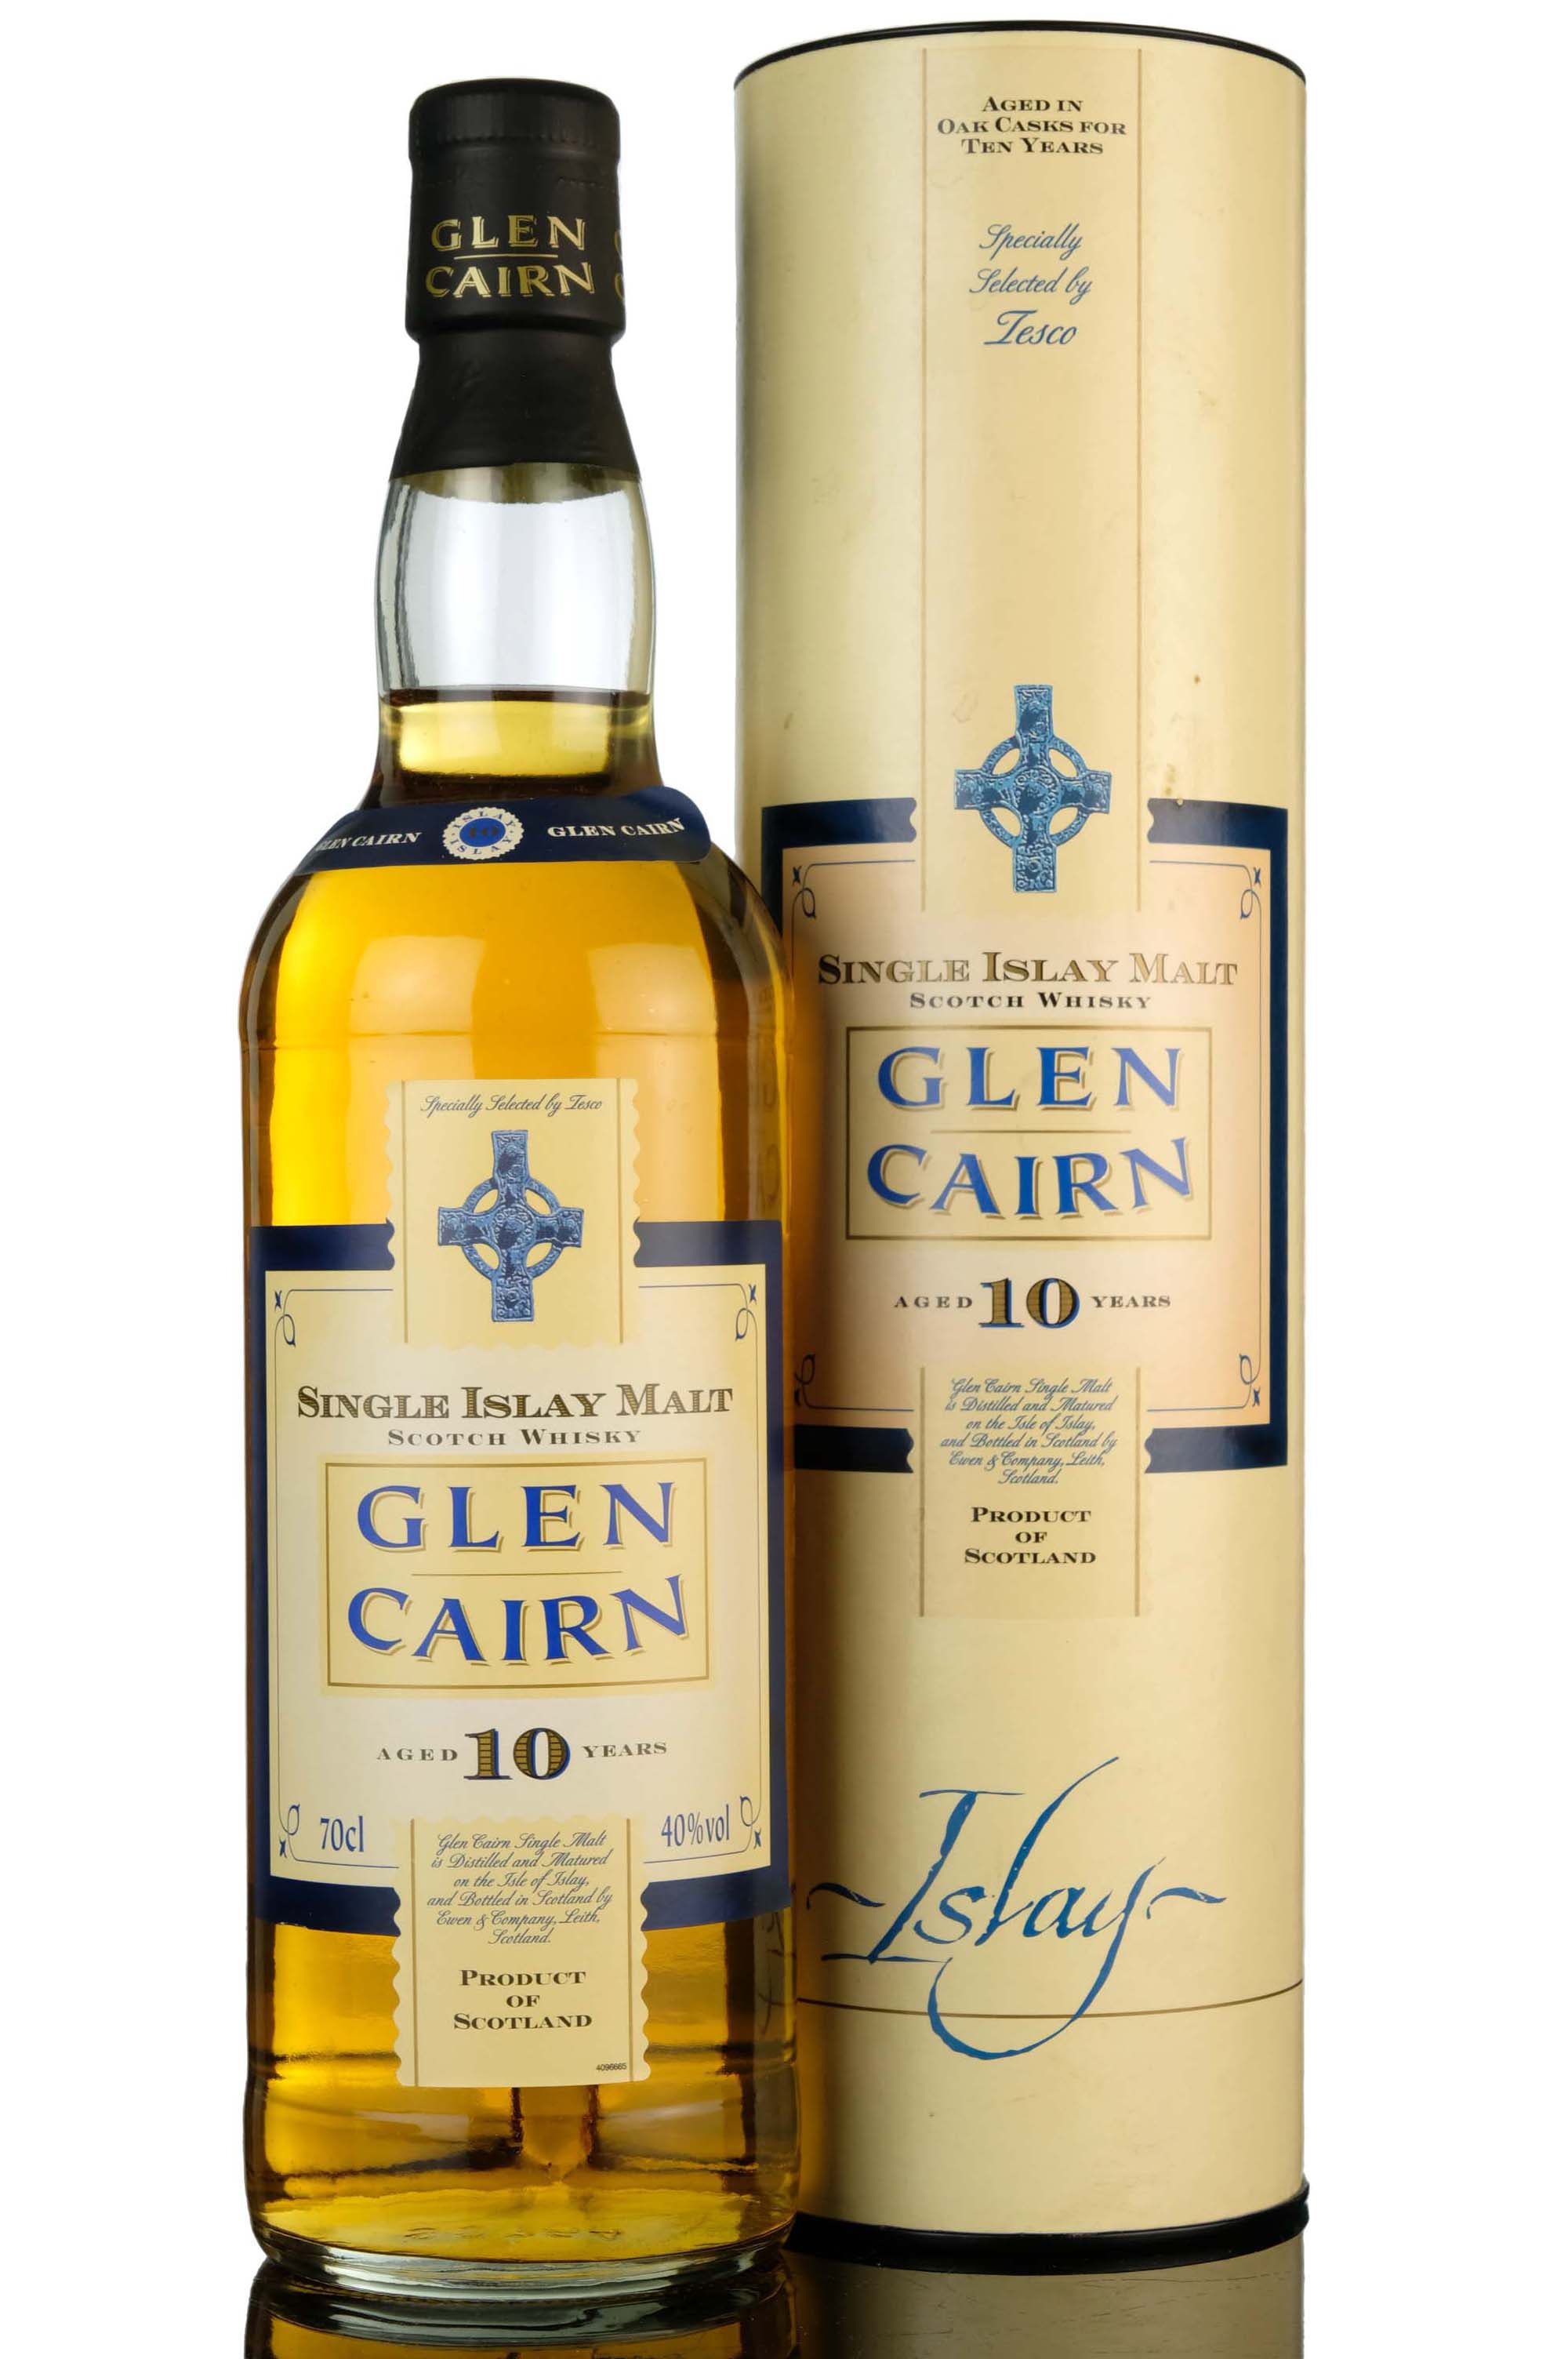 Glen Cairn 10 Year Old - Early 2000s